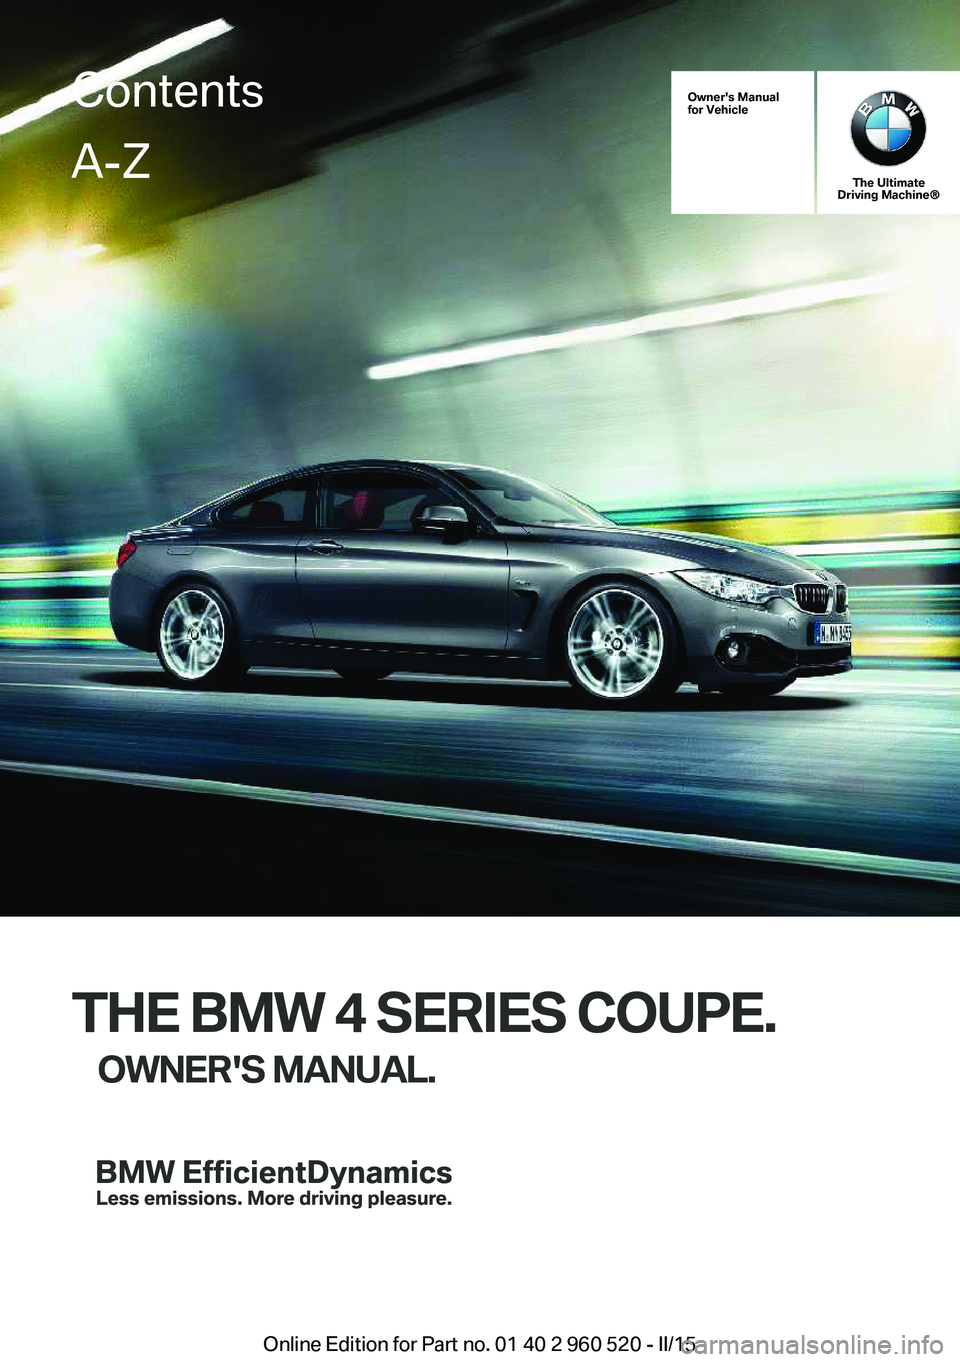 BMW 435I XDRIVE COUPE 2015  Owners Manual Owner's Manual
for Vehicle
The Ultimate
Driving Machine®
THE BMW 4 SERIES COUPE.
OWNER'S MANUAL.
ContentsA-Z
Online Edition for Part no. 01 40 2 960 520 - II/15   